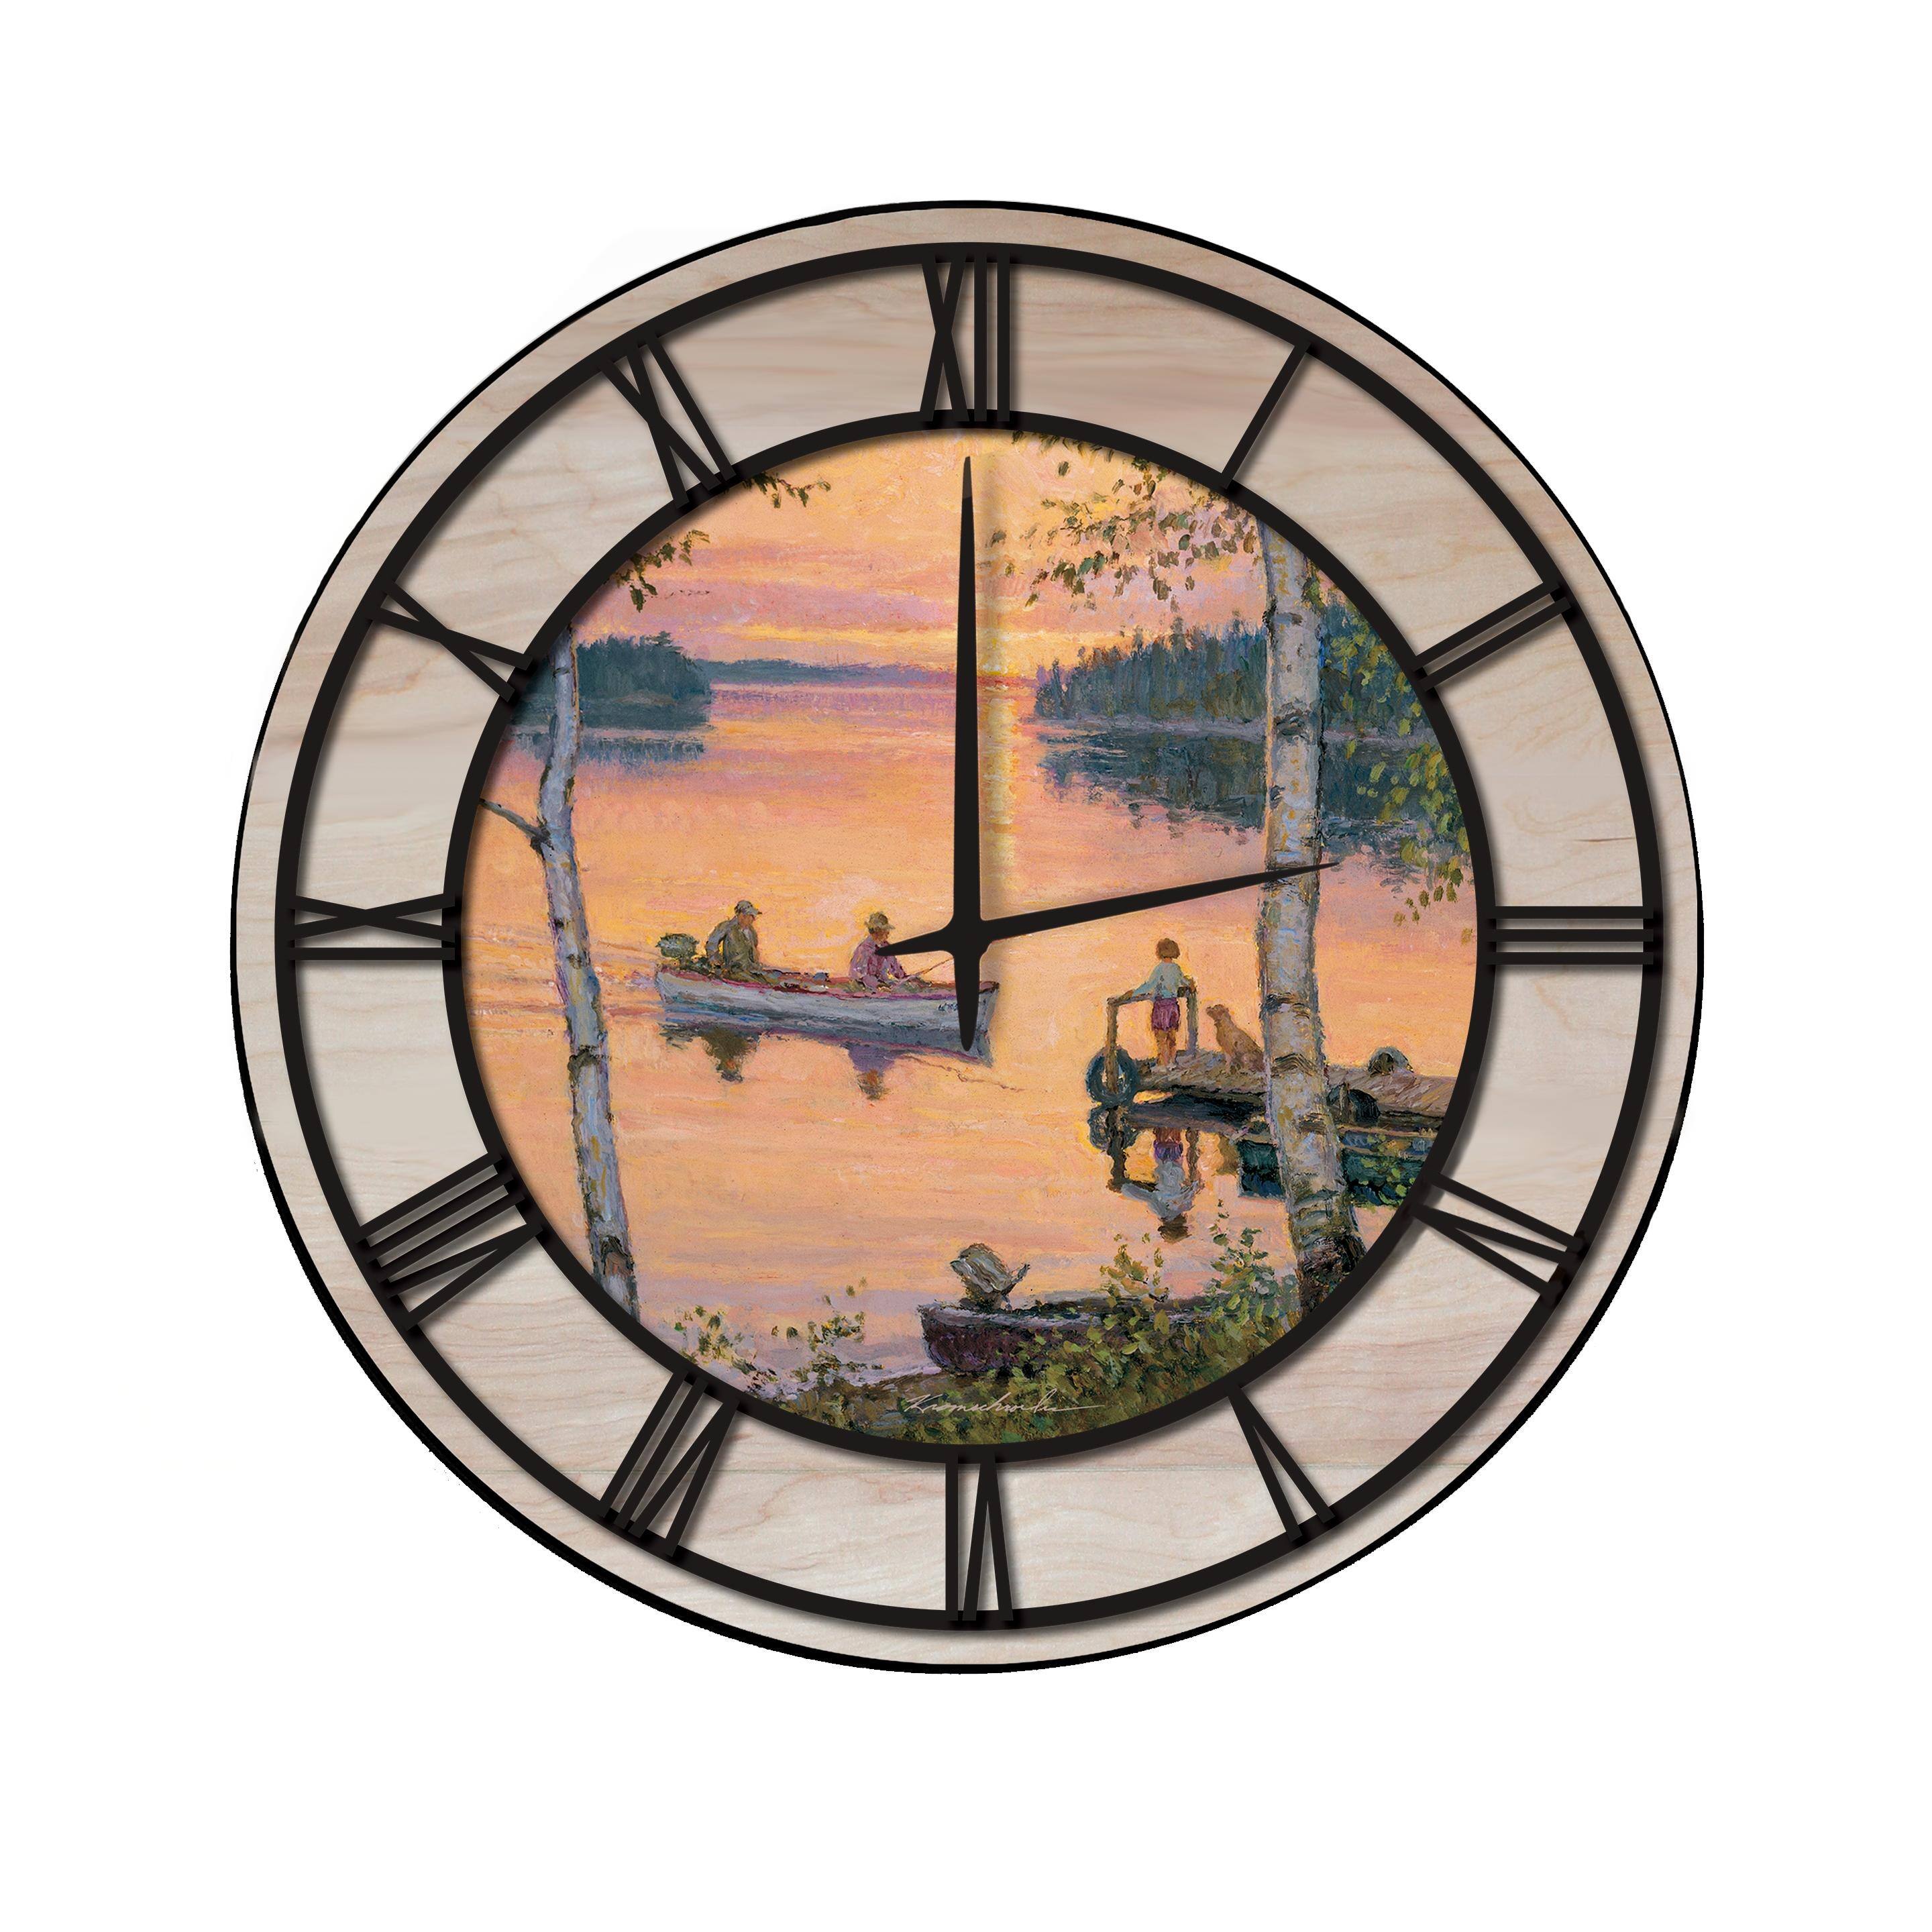 Wall Clock with Natural Woodgrain Accent - Lakeland Sunset - Black ...